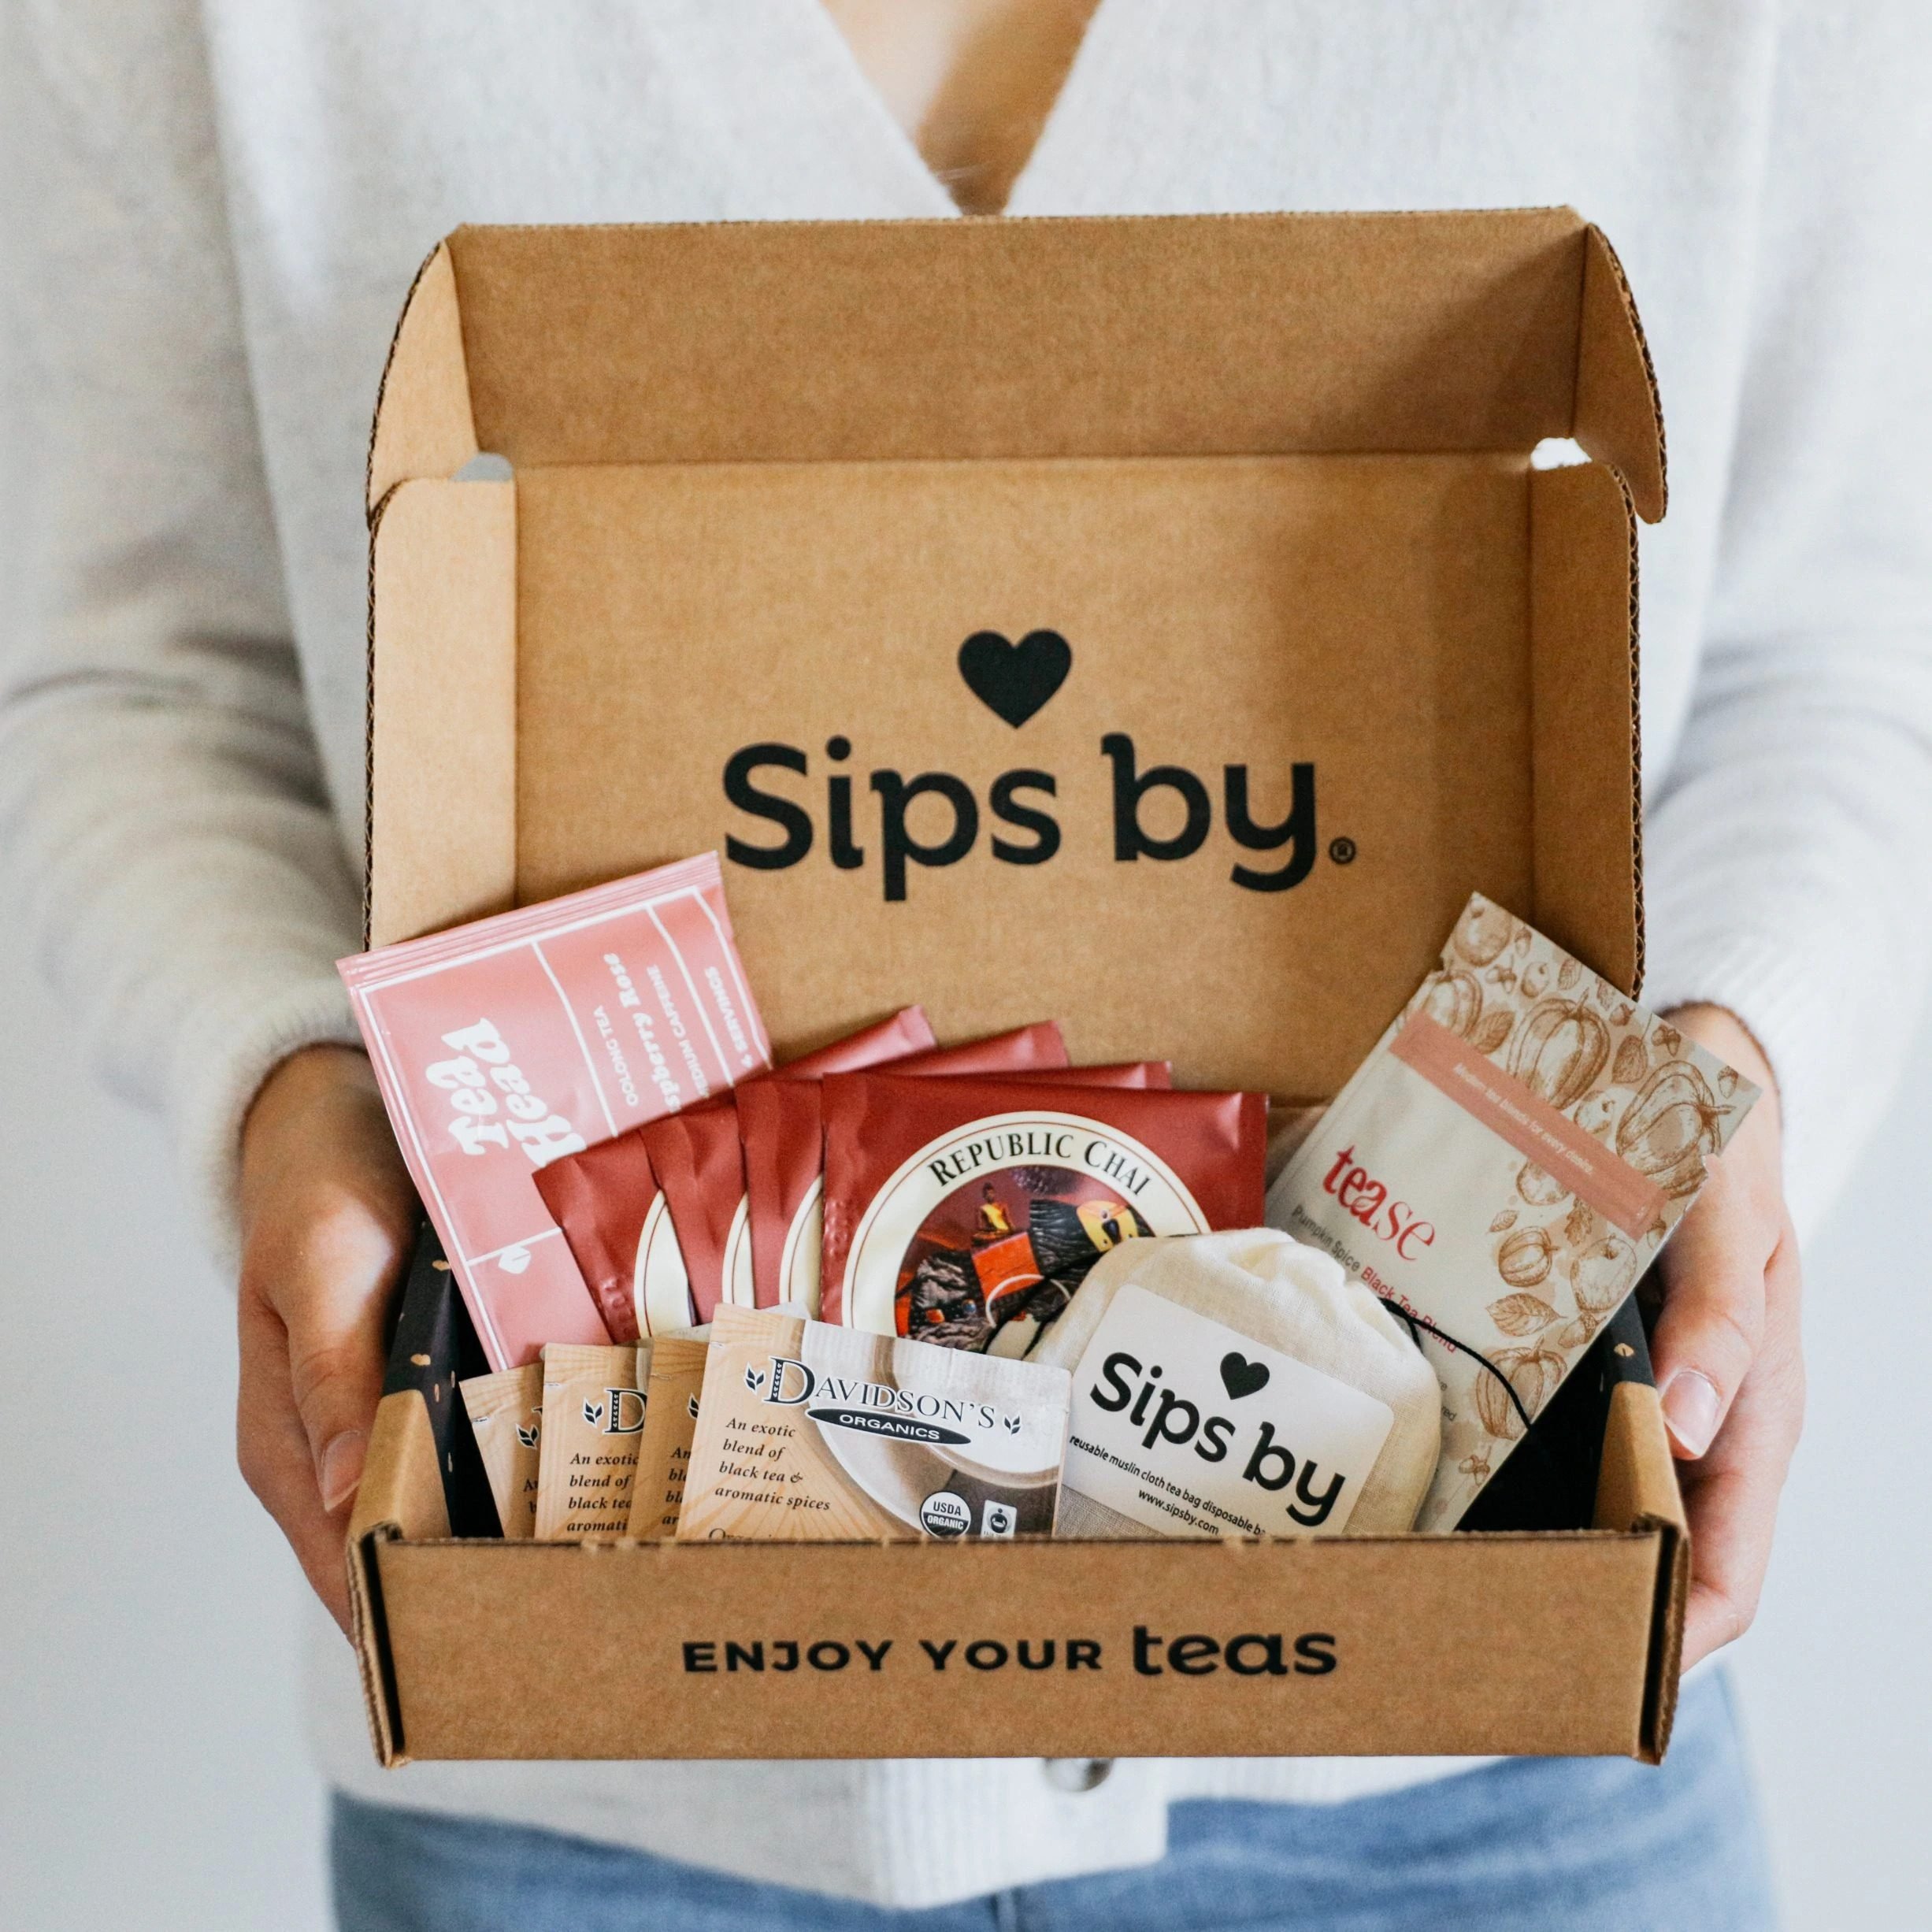 Recess Monthly Subscription Box